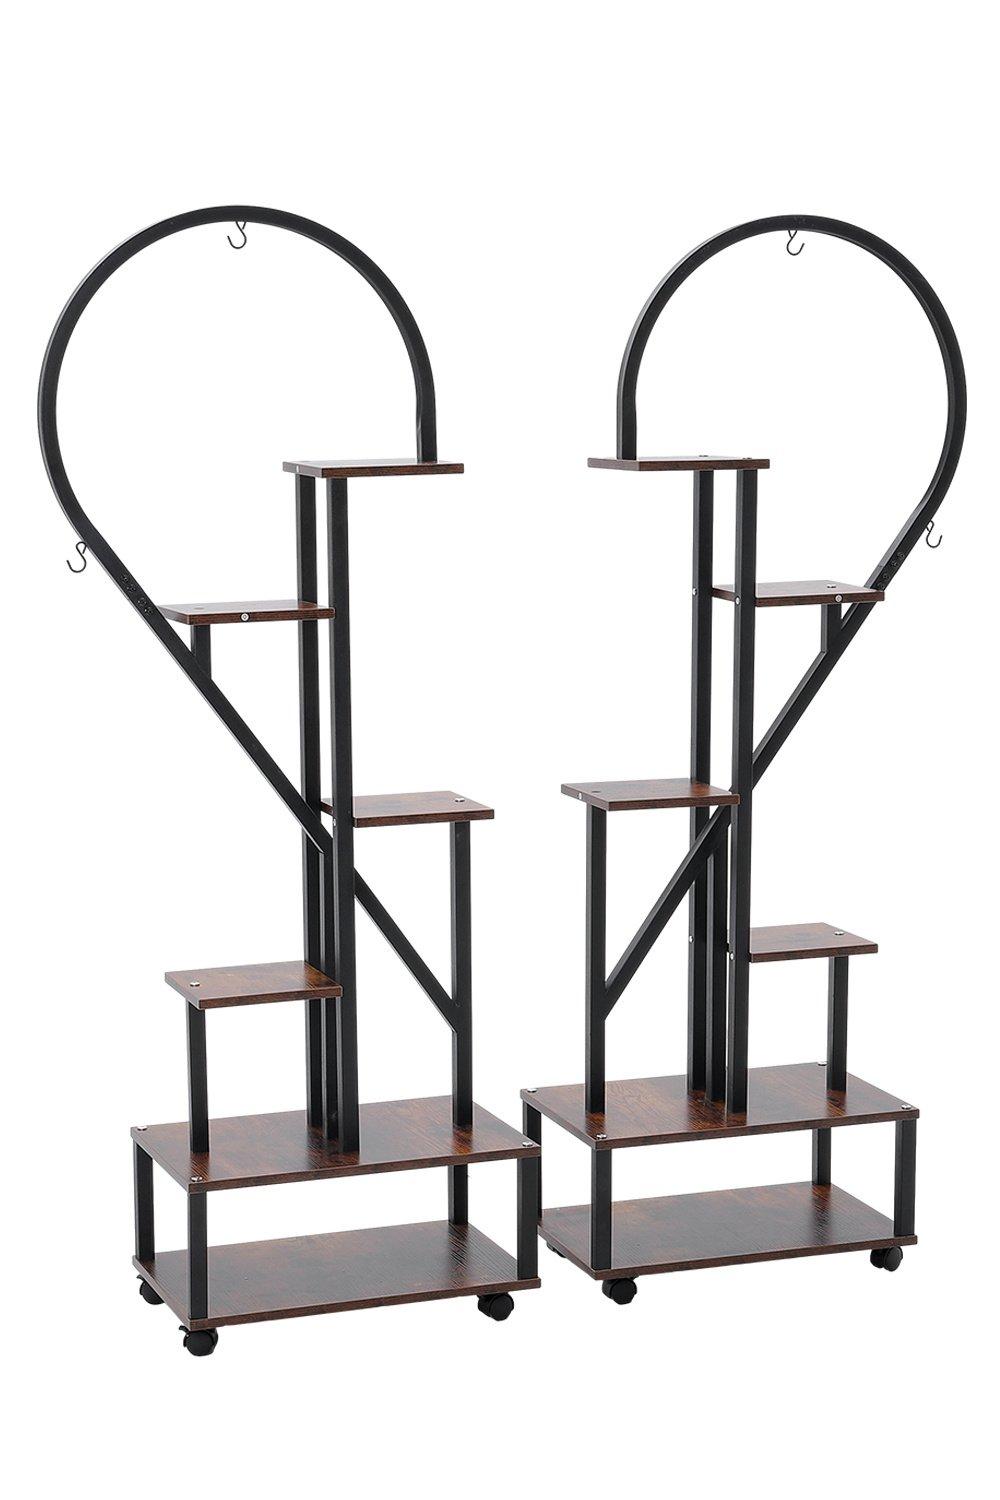 2 Pcs Half-Heart-Shaped Tiered Plant Stand